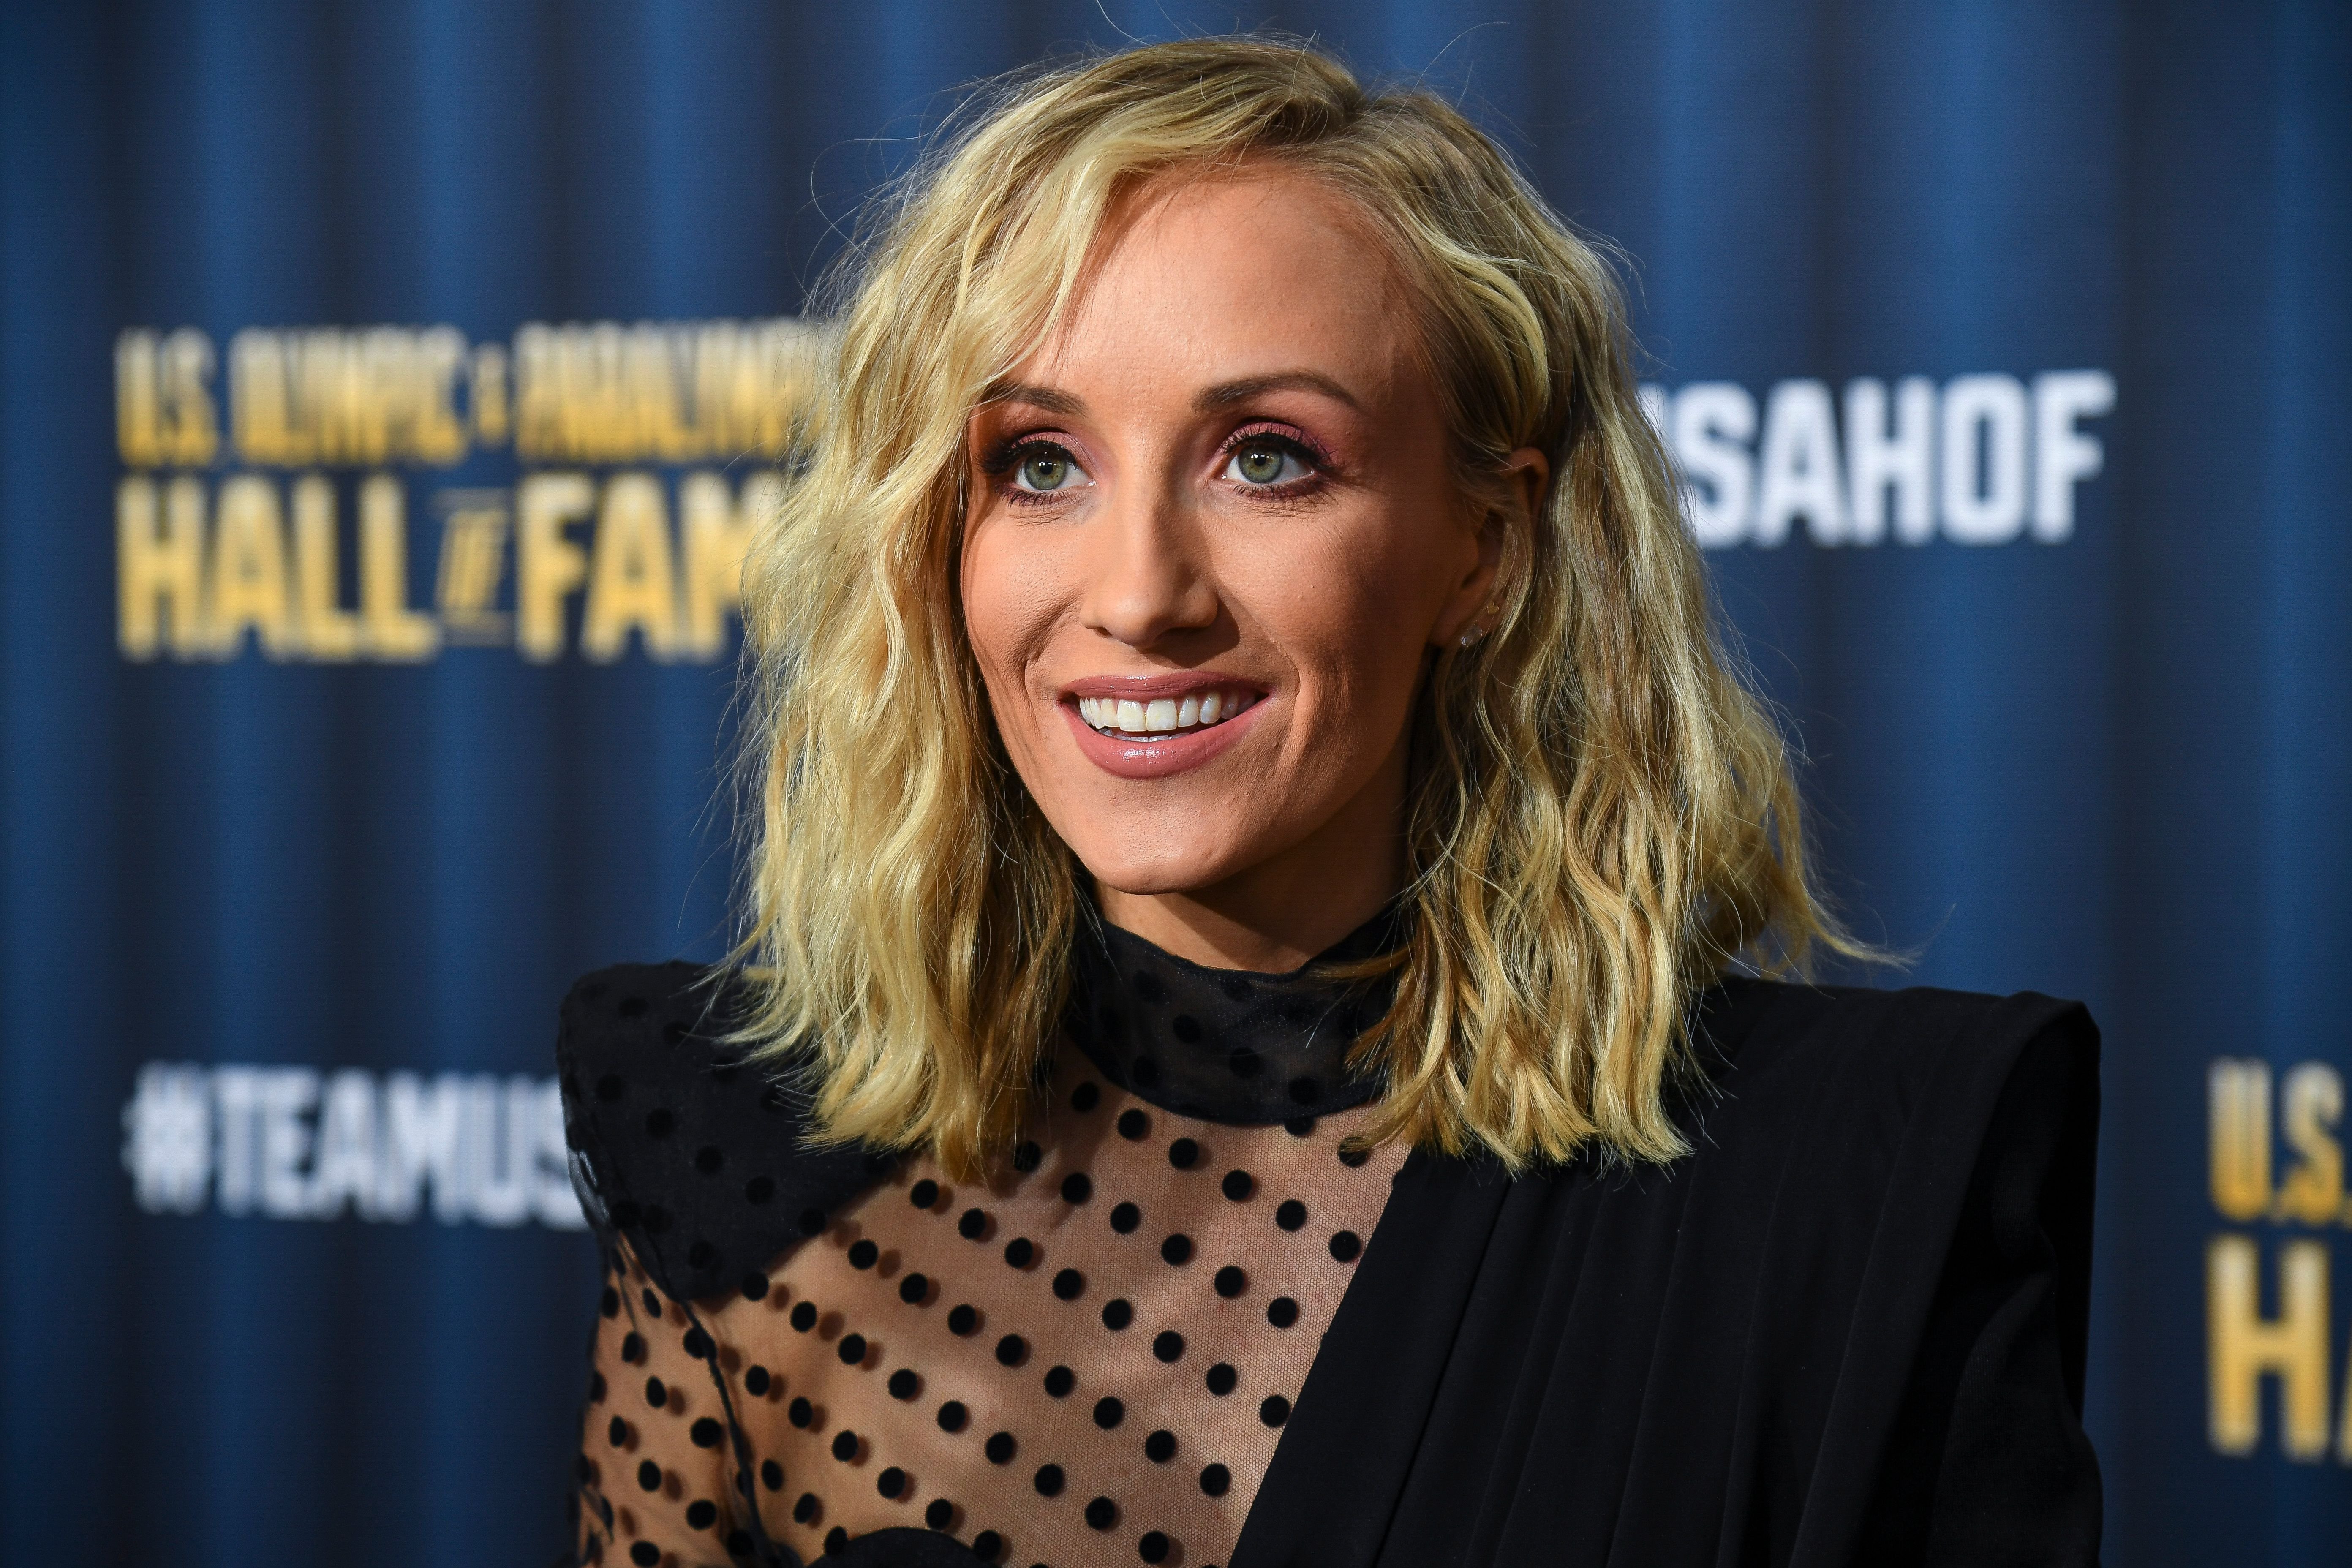 Olympic gymnast Nastia Liukin at the U.S. Olympic Hall of Fame Class of 2019 Induction Ceremony on November 1, 2019 | Photo: Getty Images